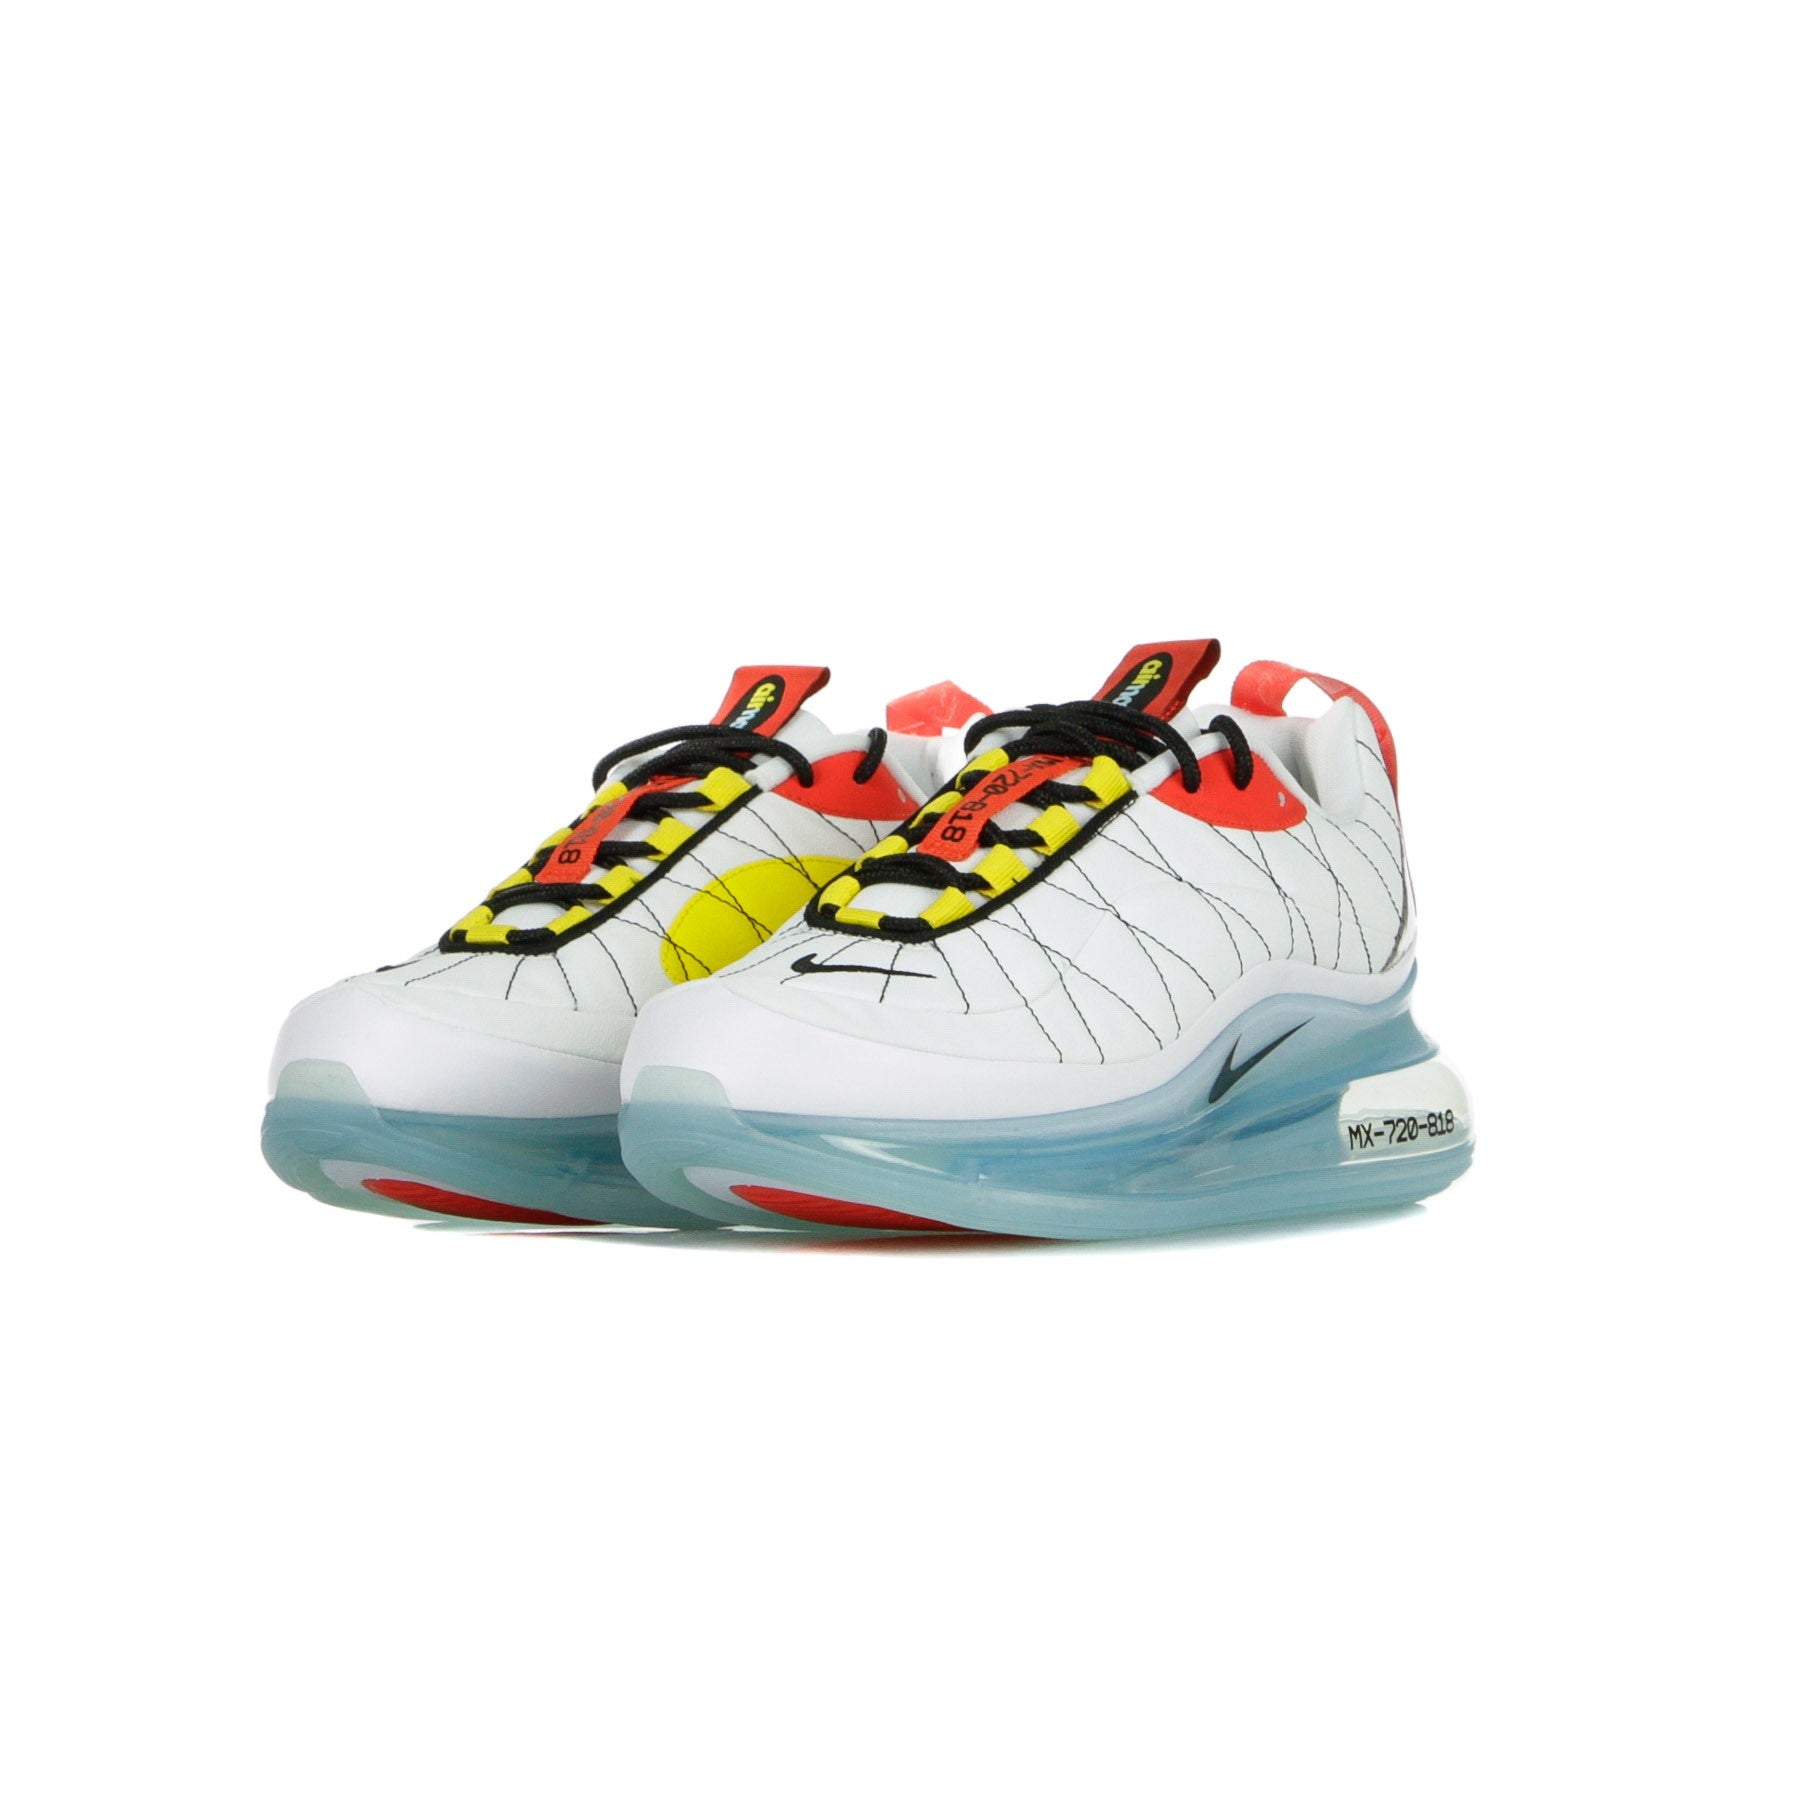 Low Men's Shoe Mx-720-818 White/black/speed Yellow/chile Red